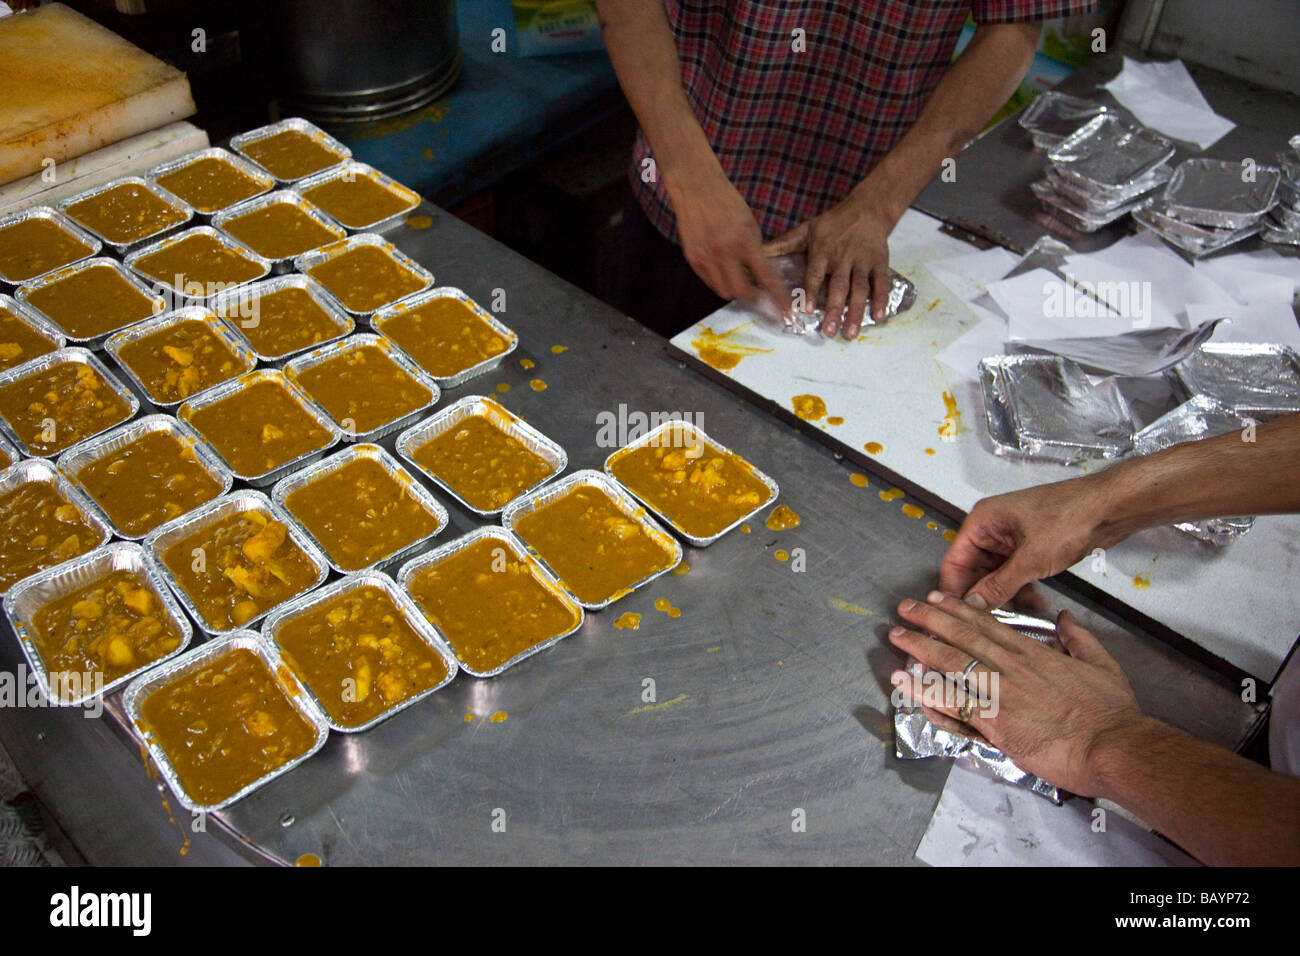 Packing Train Meals in the Food Car on a Train in India Stock Photo